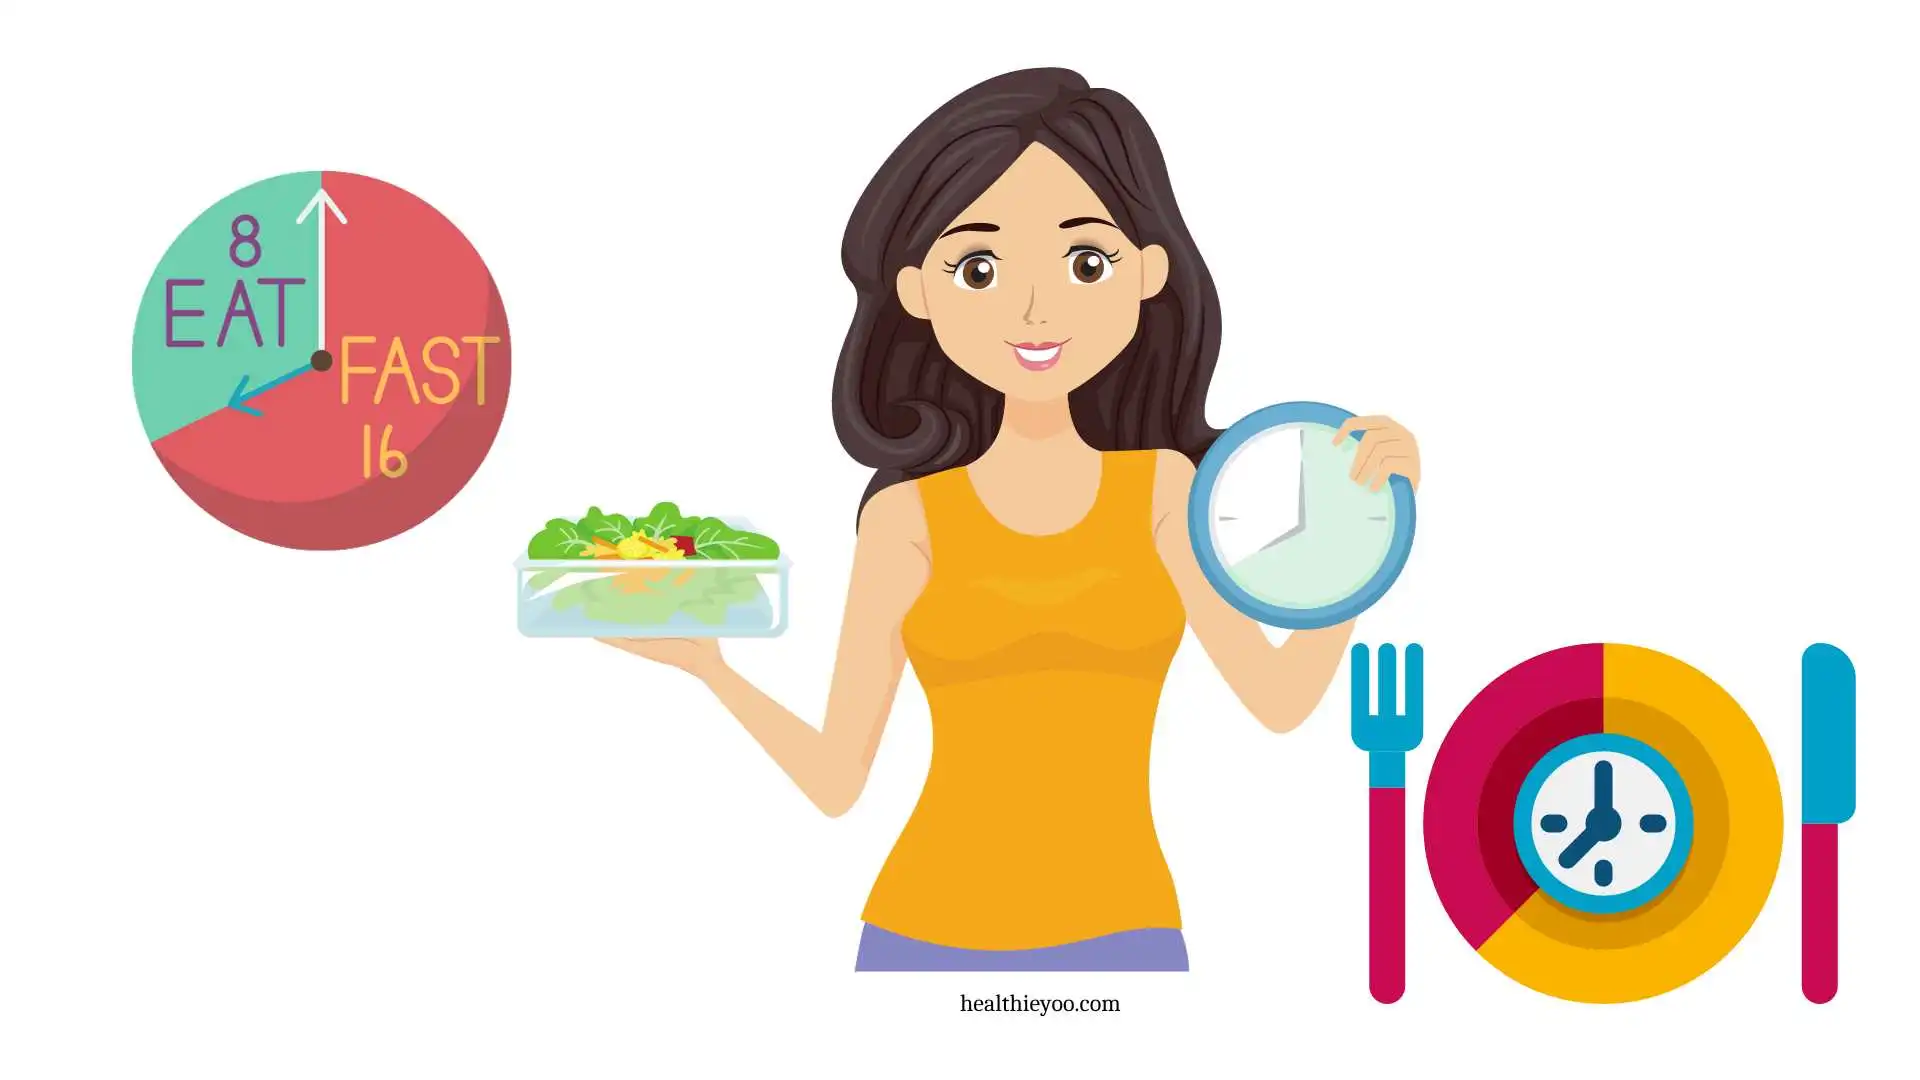 Intermittent fasting types, TRE, 16:8, 5:2, health benefits, weight loss